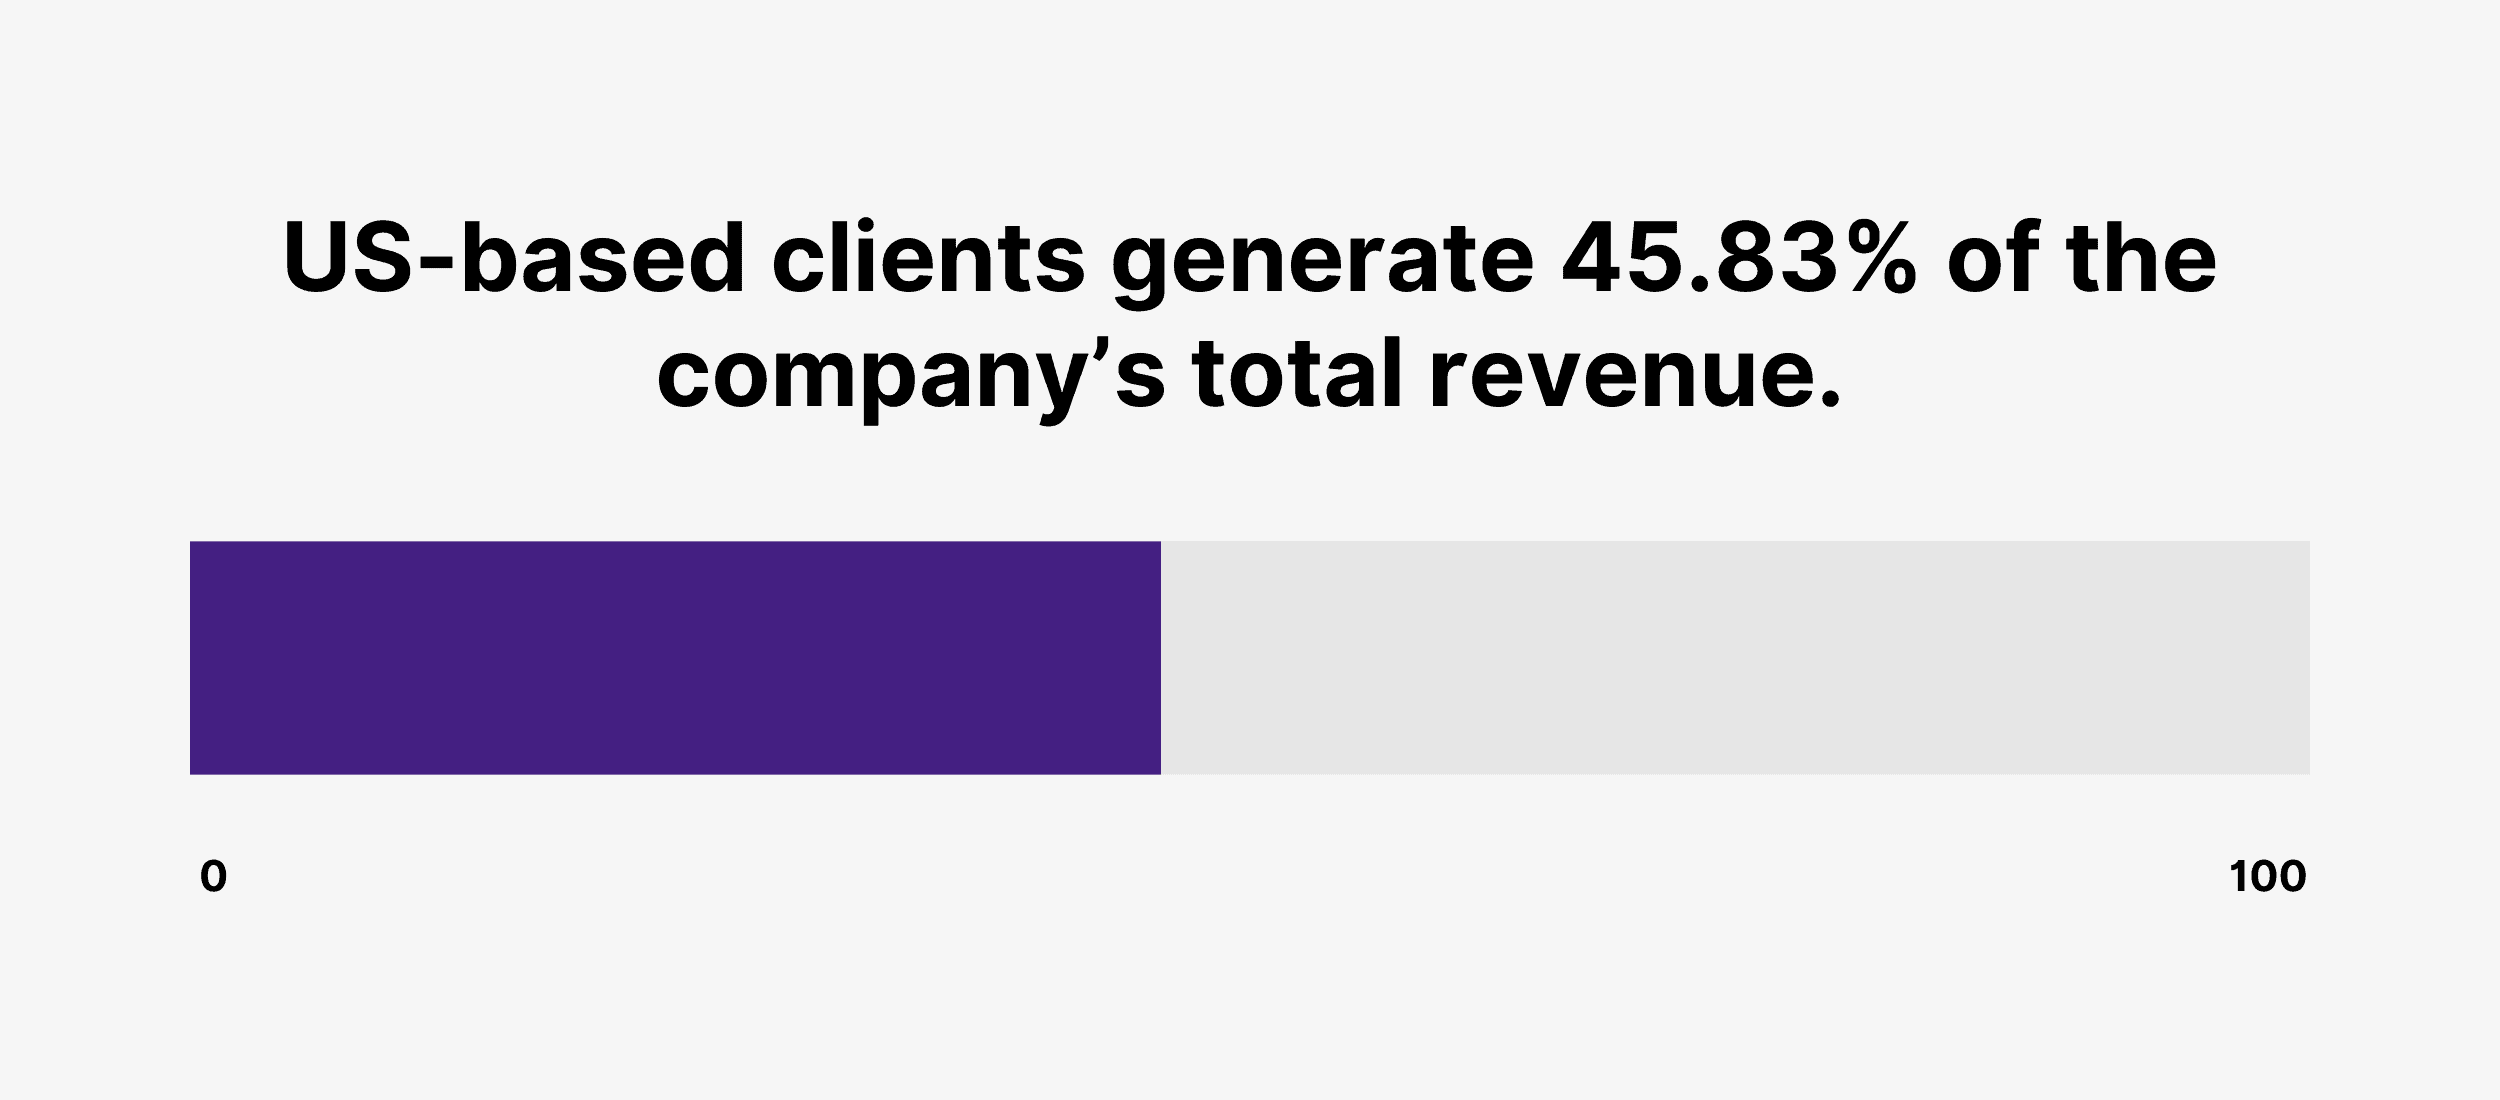 US-based clients generate 45.83% of the company’s total revenue.